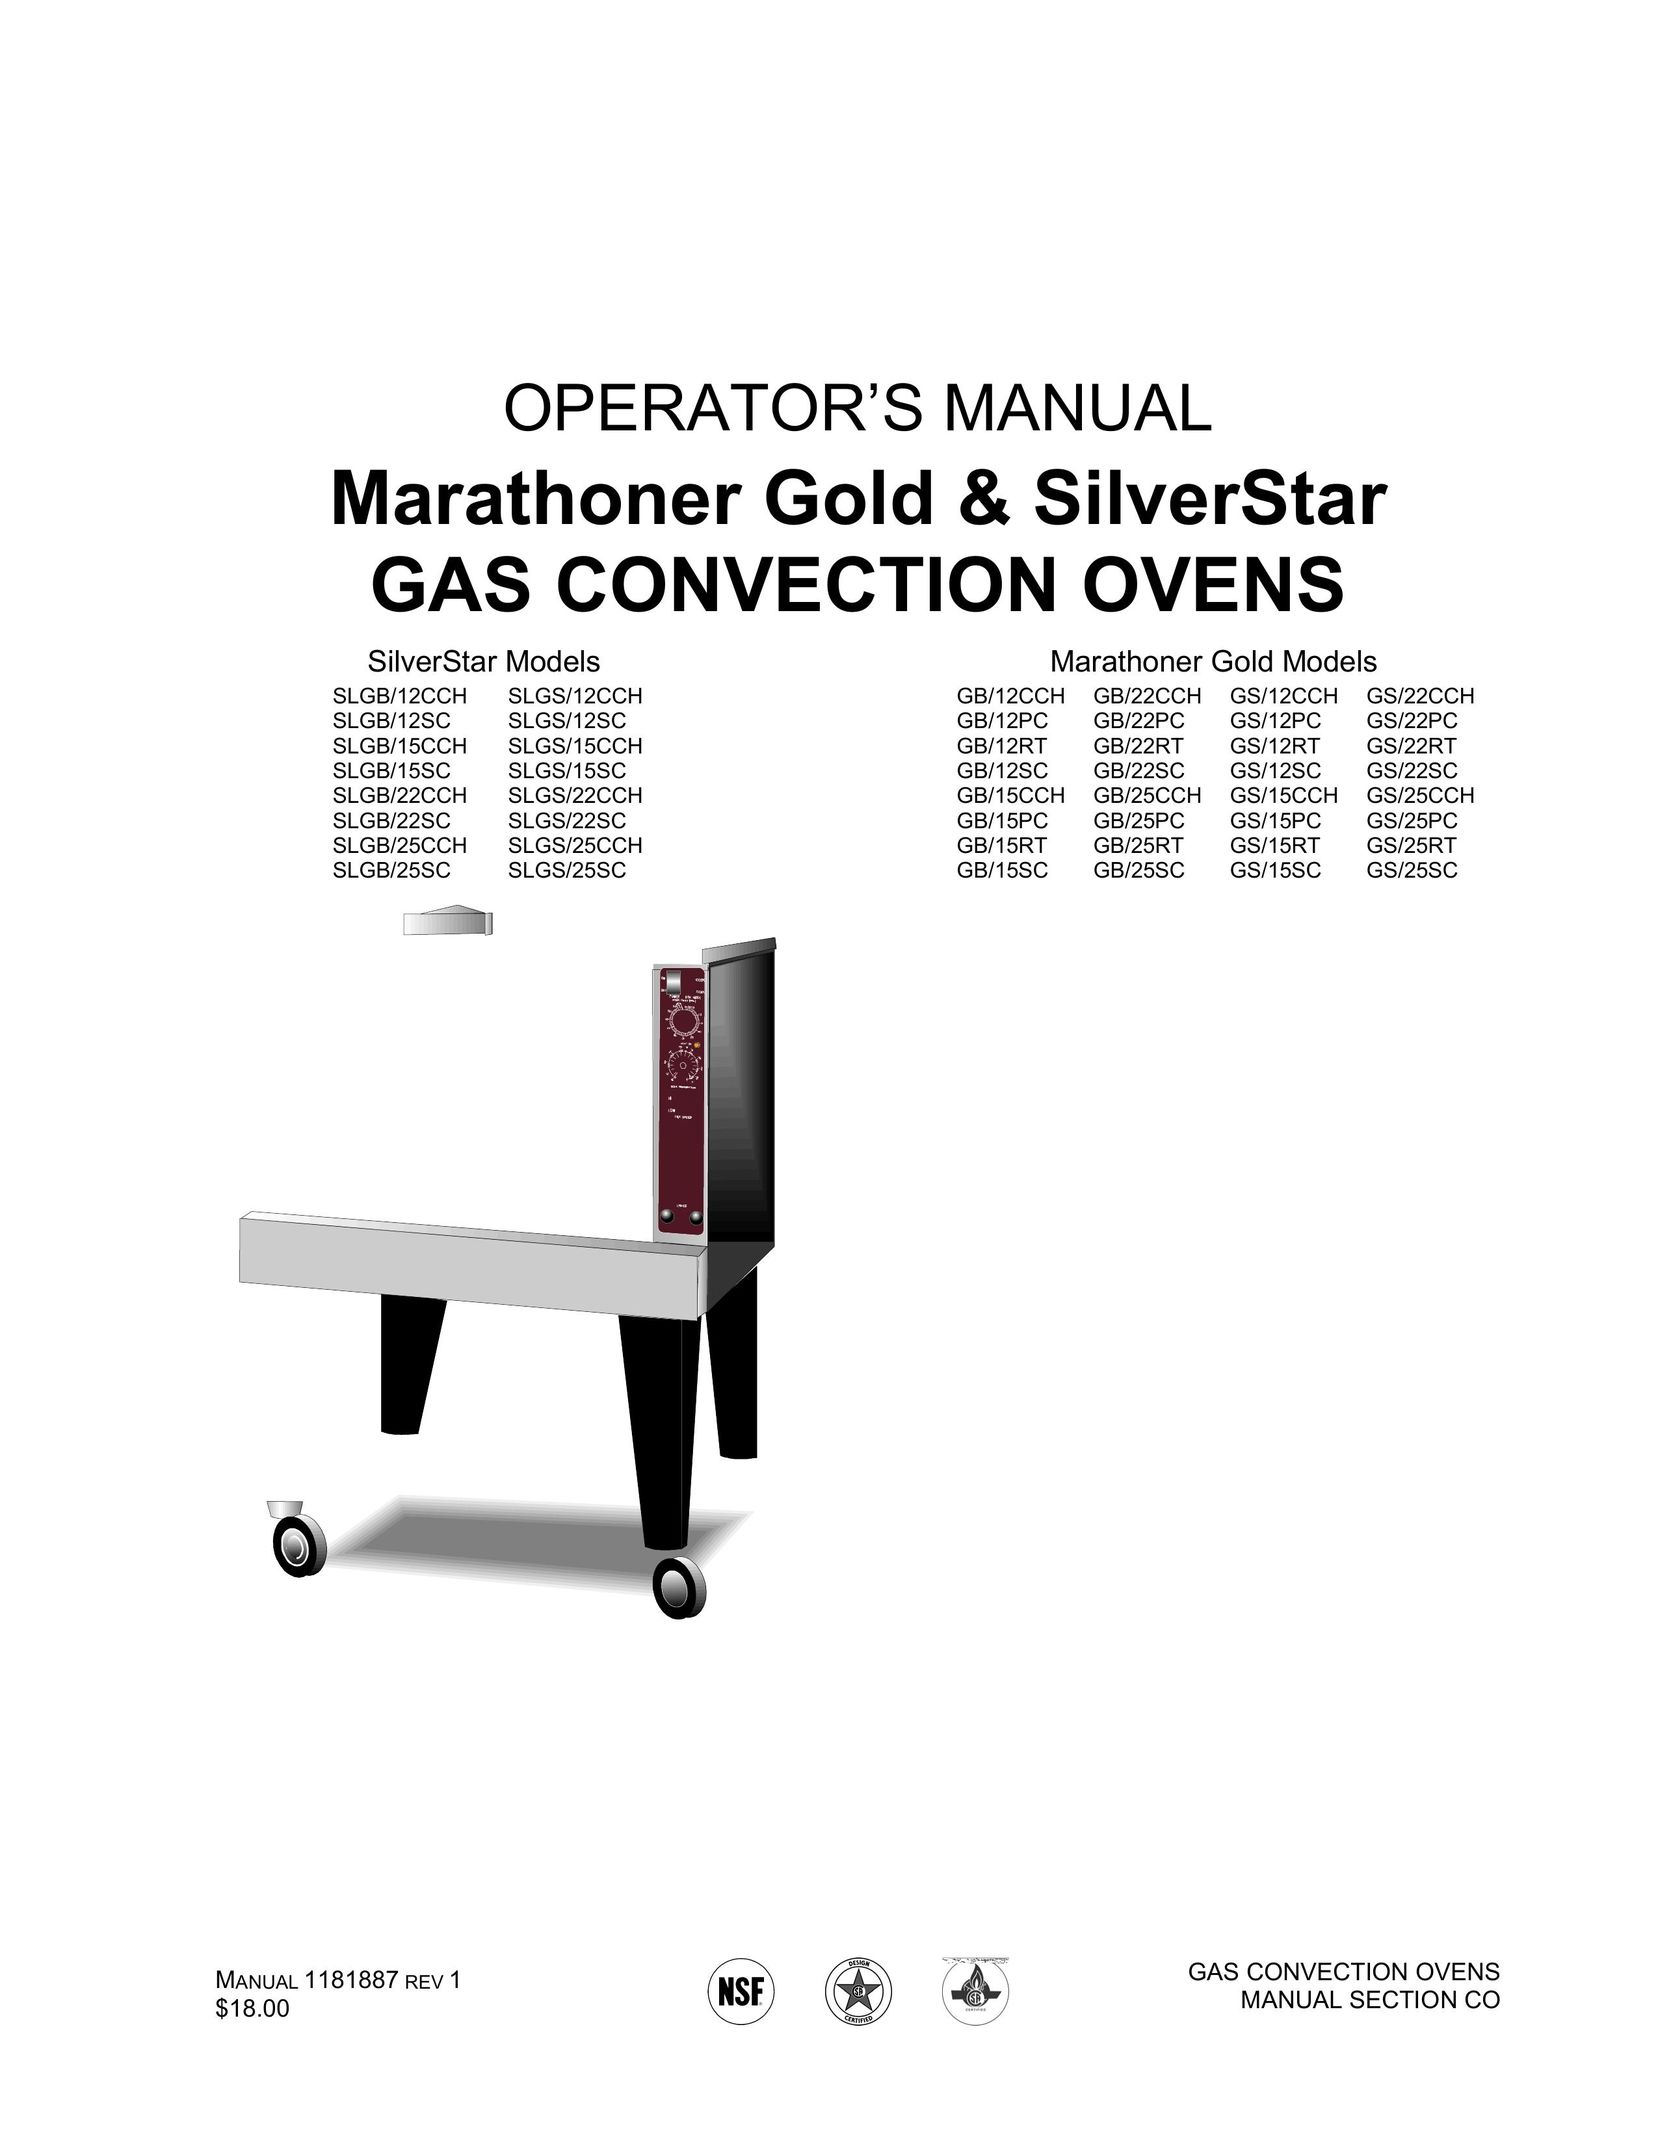 Southbend SLGS/15SC Oven User Manual